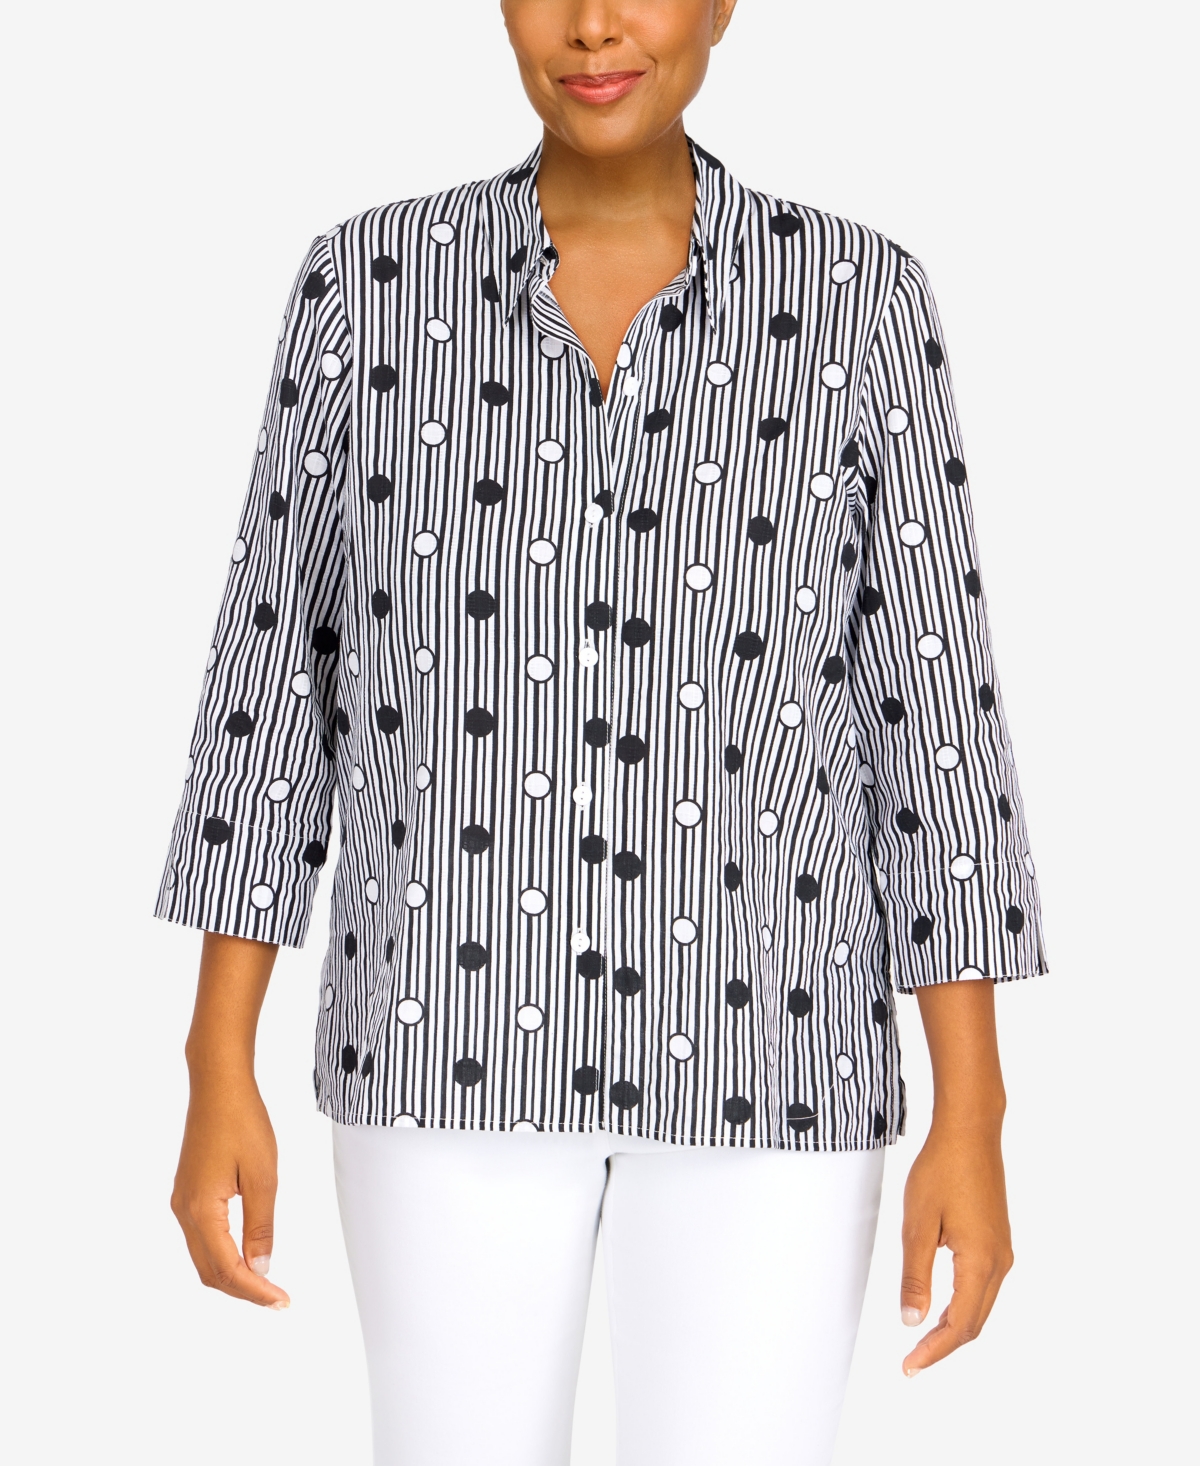 ALFRED DUNNER PETITE CLASSICS DOT STRIPE 3/4 SLEEVE BUTTON DOWN TOP